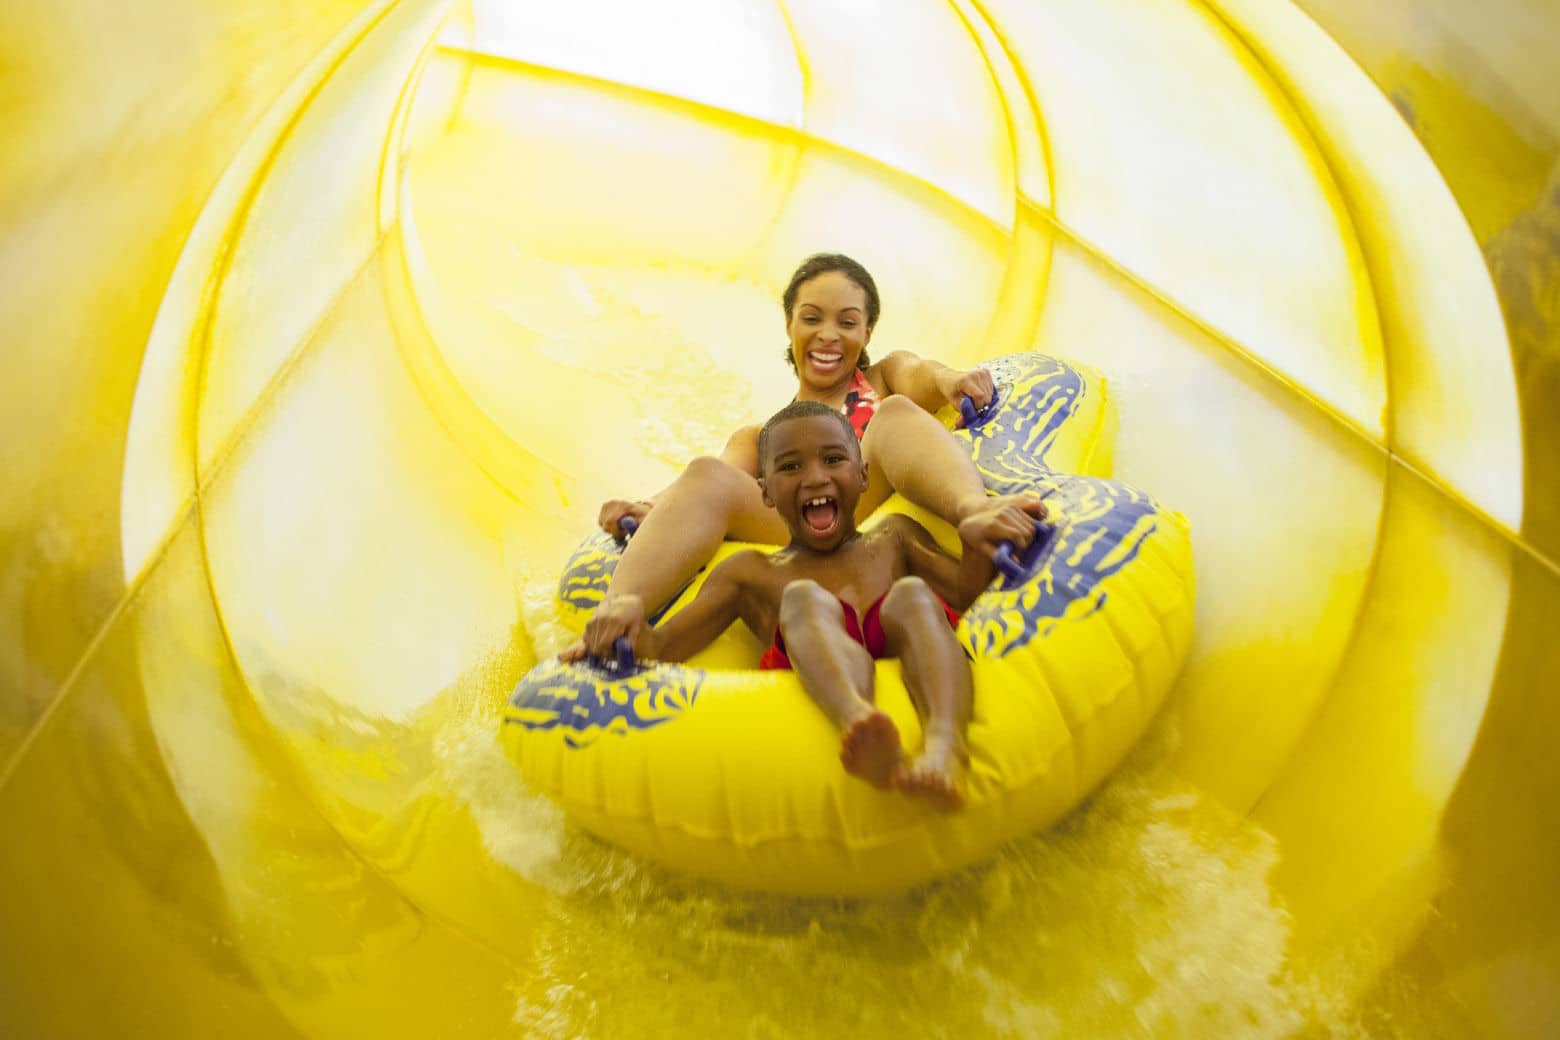 Chicago-based Great Wolf Resorts Inc., which operates 18 indoor and outdoor water parks in North America, including an indoor park in Williamsburg, Virginia, is considering a $200 million water park and lodge in Cecil County, Maryland. (Courtesy Great Wolf Resorts Inc.)